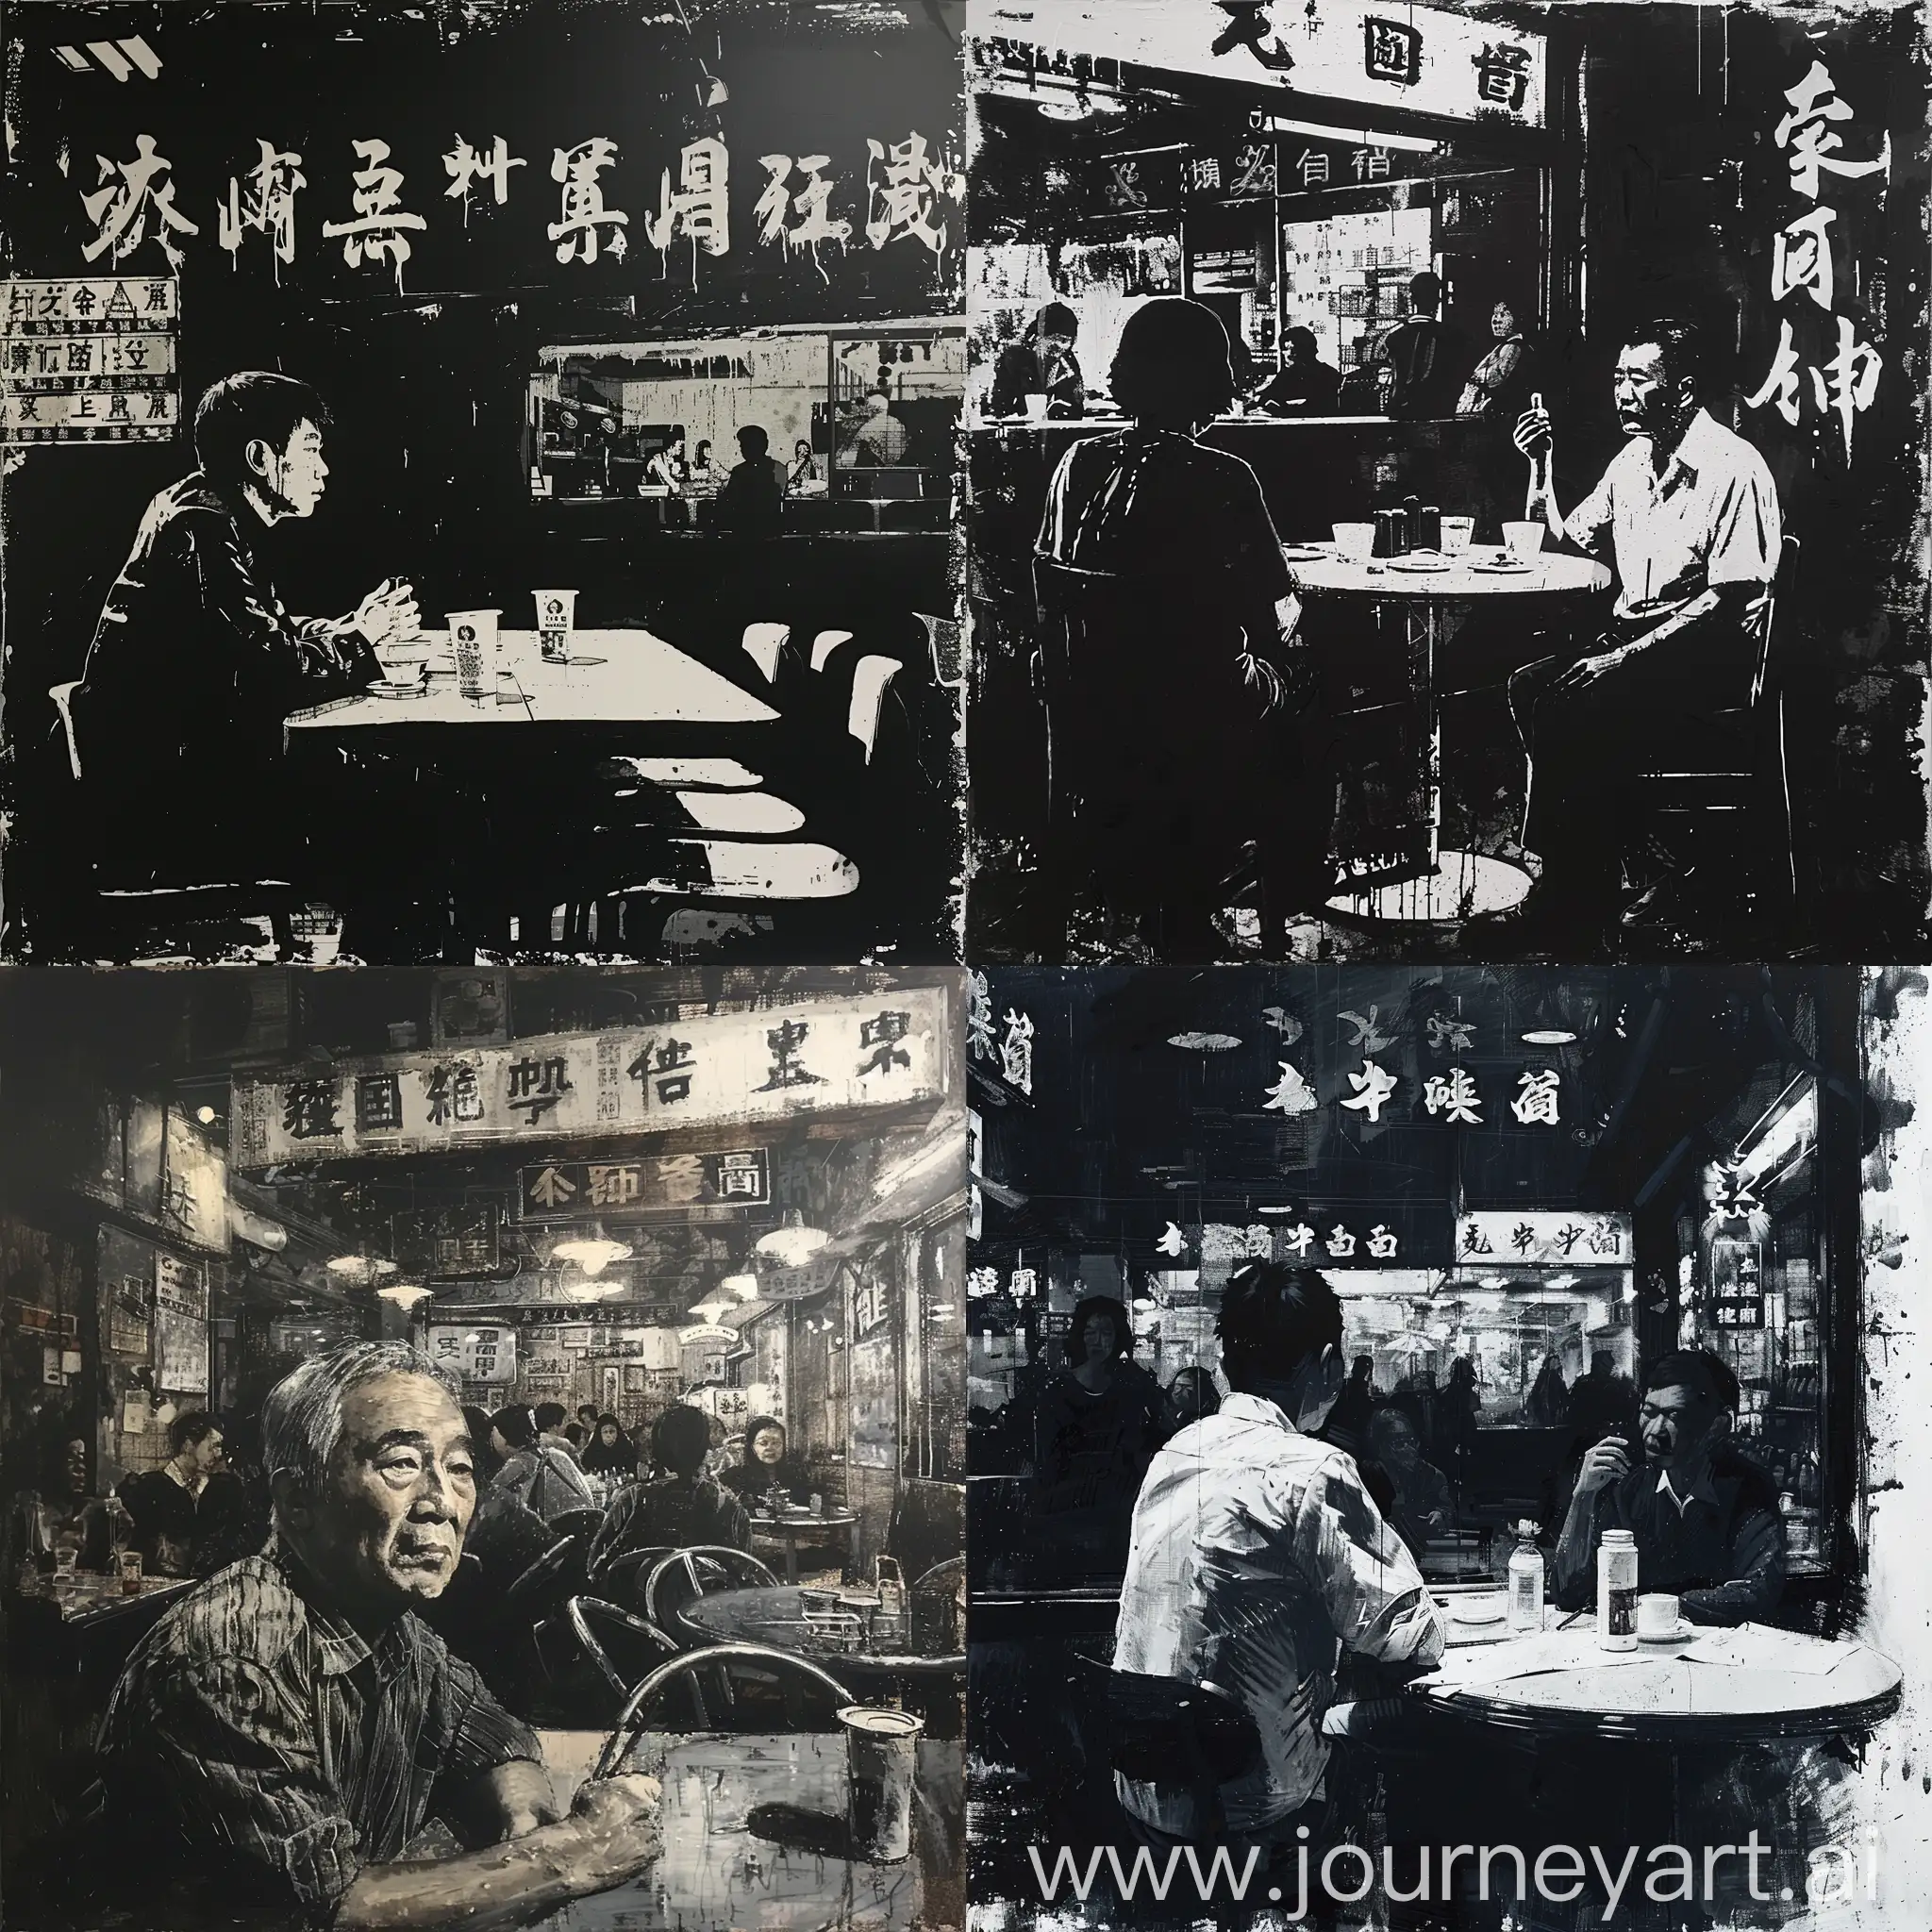 a picture of "a chinese interviewed in a hong kong diner" by wong kar wai, dry brush, white on black background 